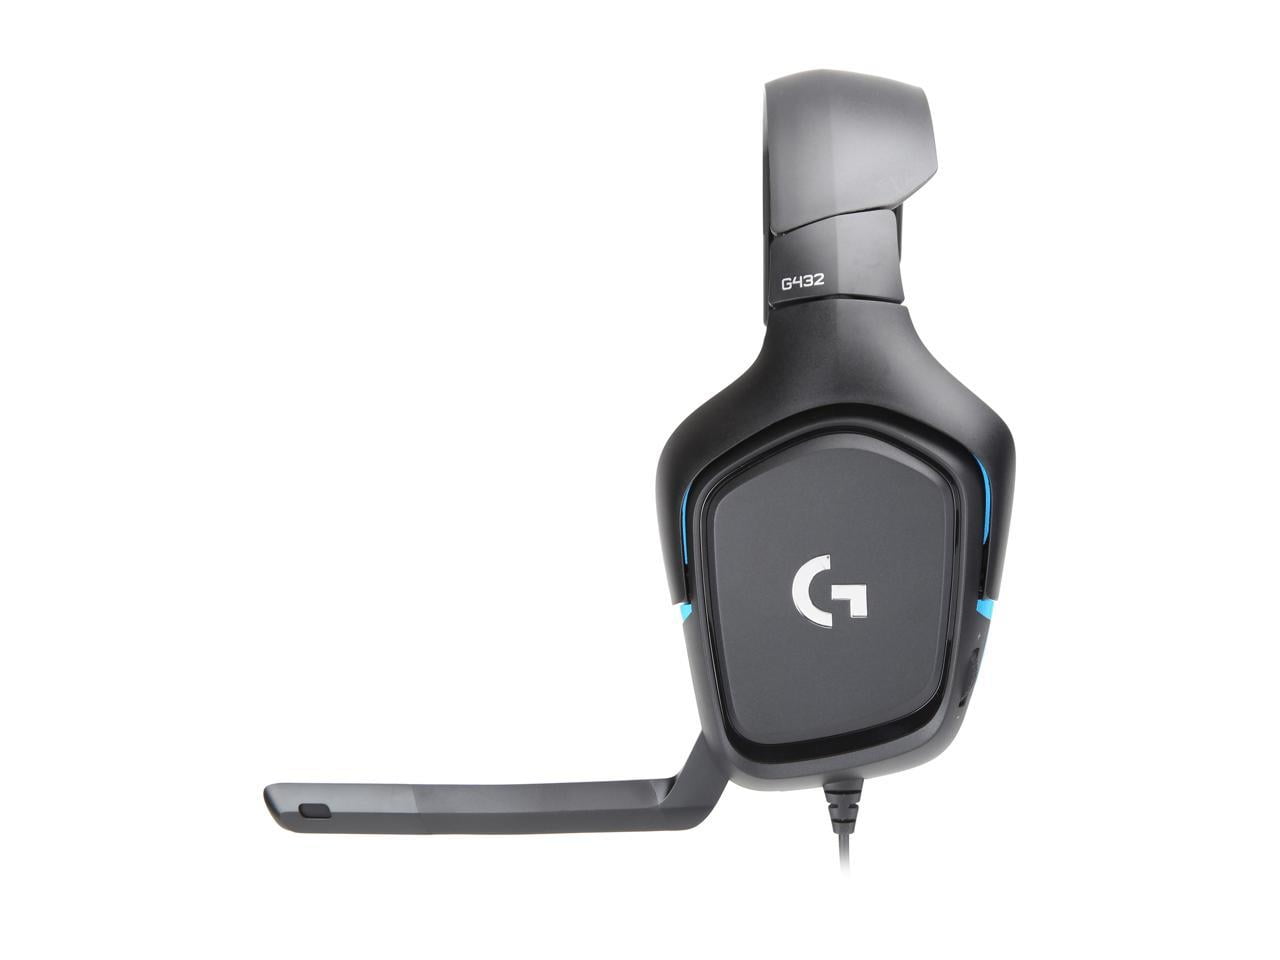 Logitech G432 Wired Gaming Headset, 7.1 Surround Sound, DTS Headphone:X  2.0, Flip-to-Mute Mic, PC (Leatherette) Black/Blue, 7.2 x 3.2 x 6.8 inches